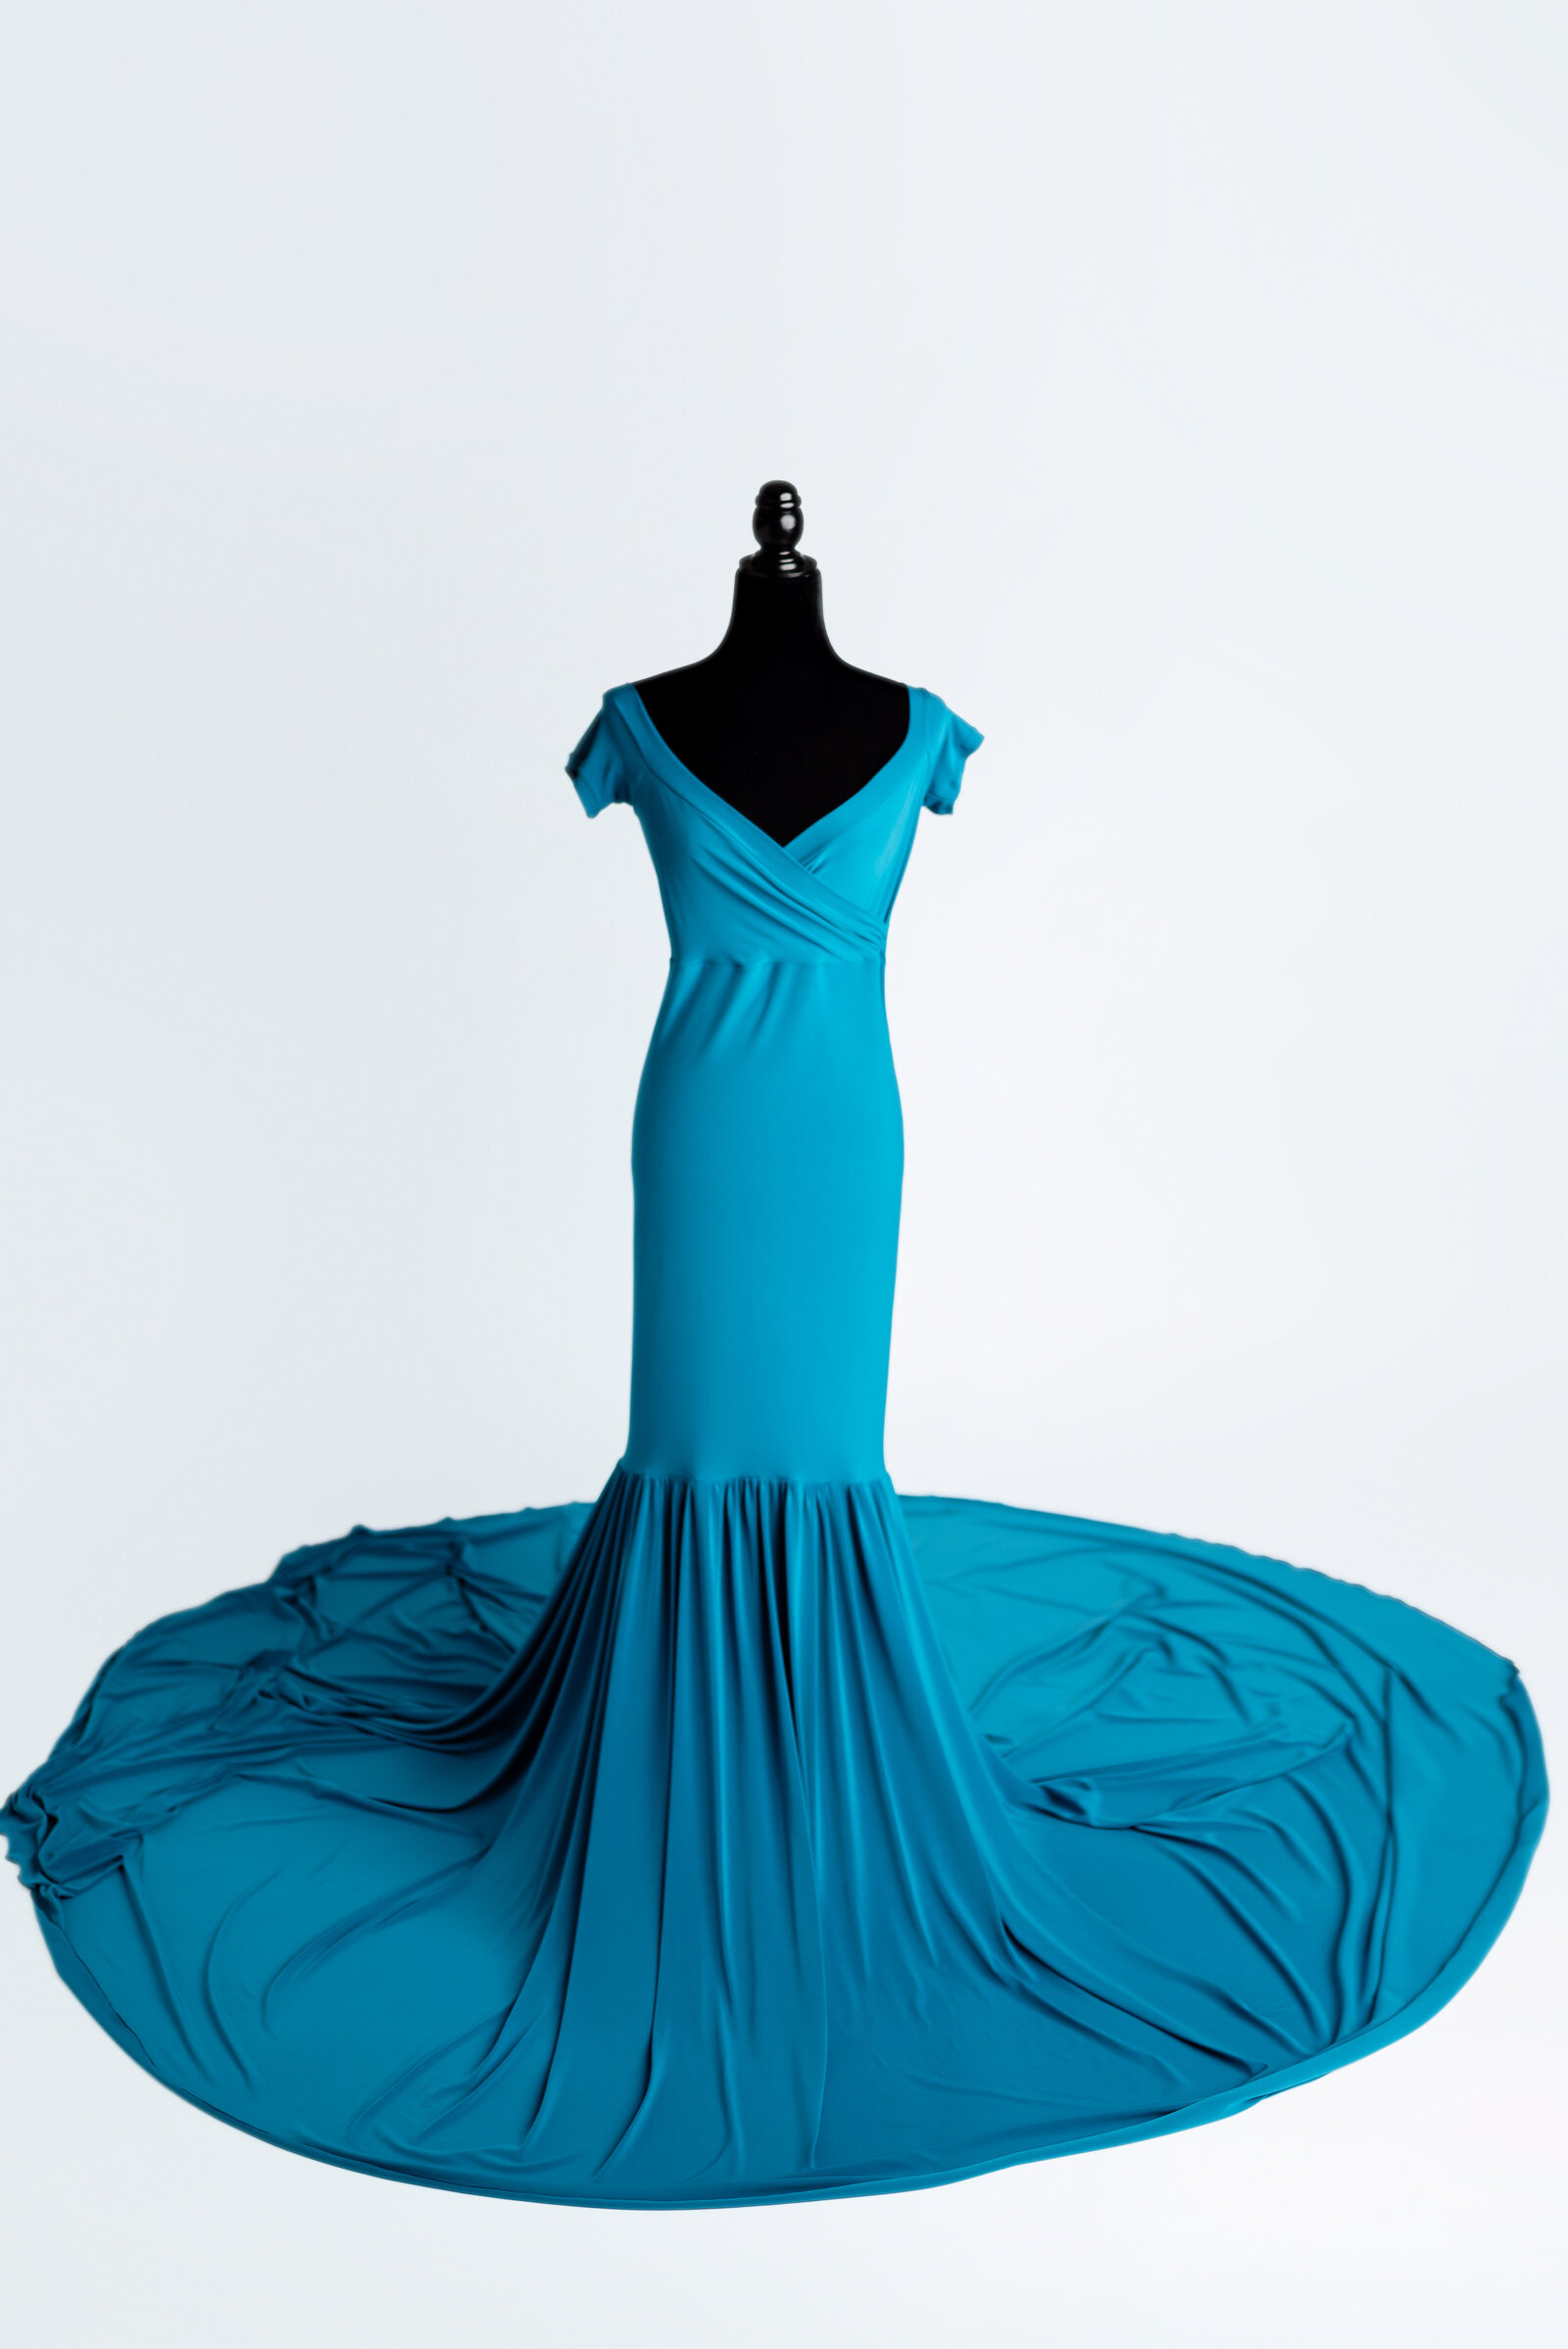 Fine art portrait gown for in studio or outdoors